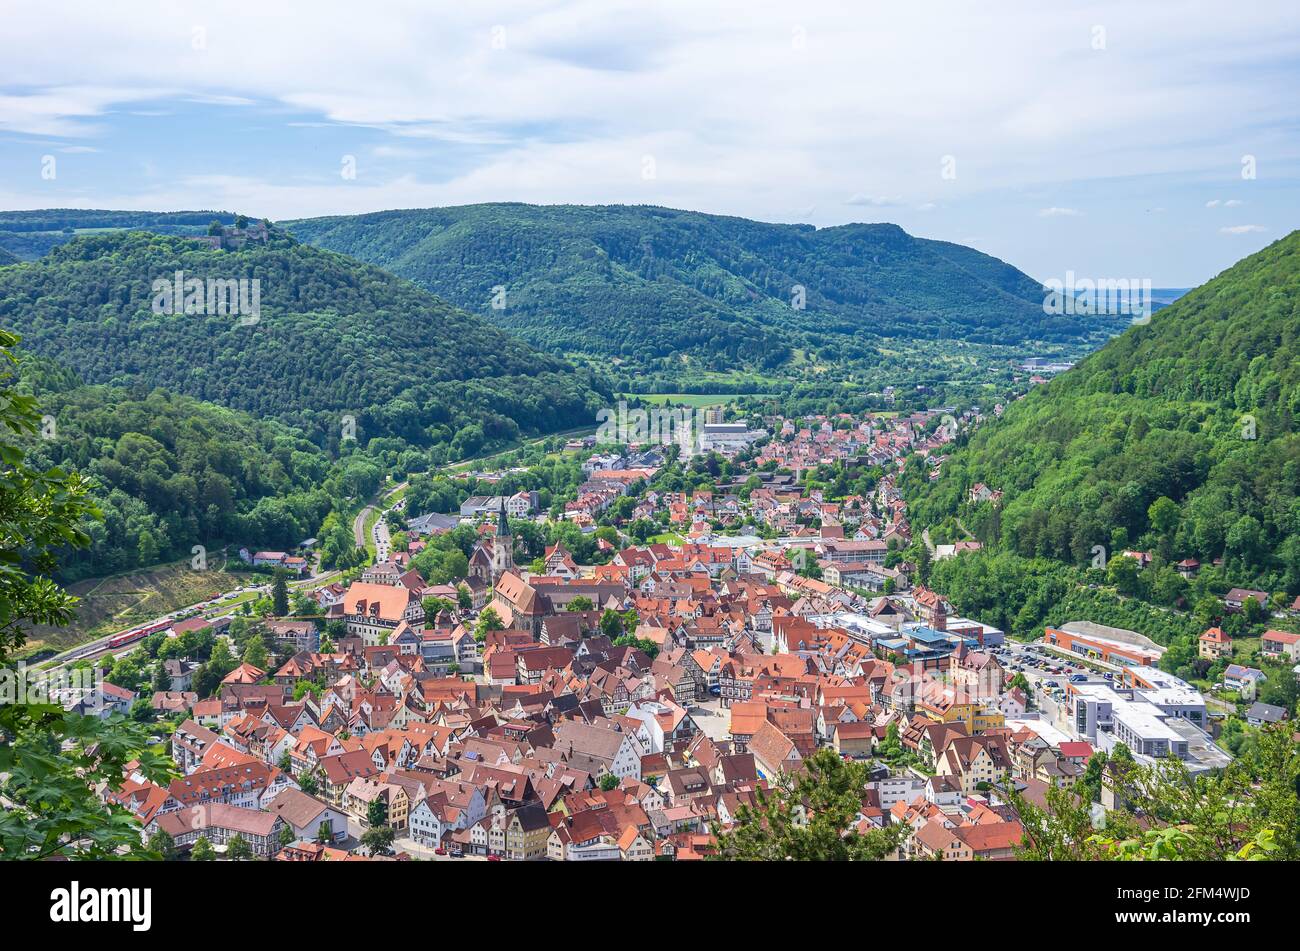 Bad Urach, Baden-Württemberg, Germany - June 6, 2014: View from above over the small town of Bad Urach at the bottom of the Swabian Alb. Stock Photo